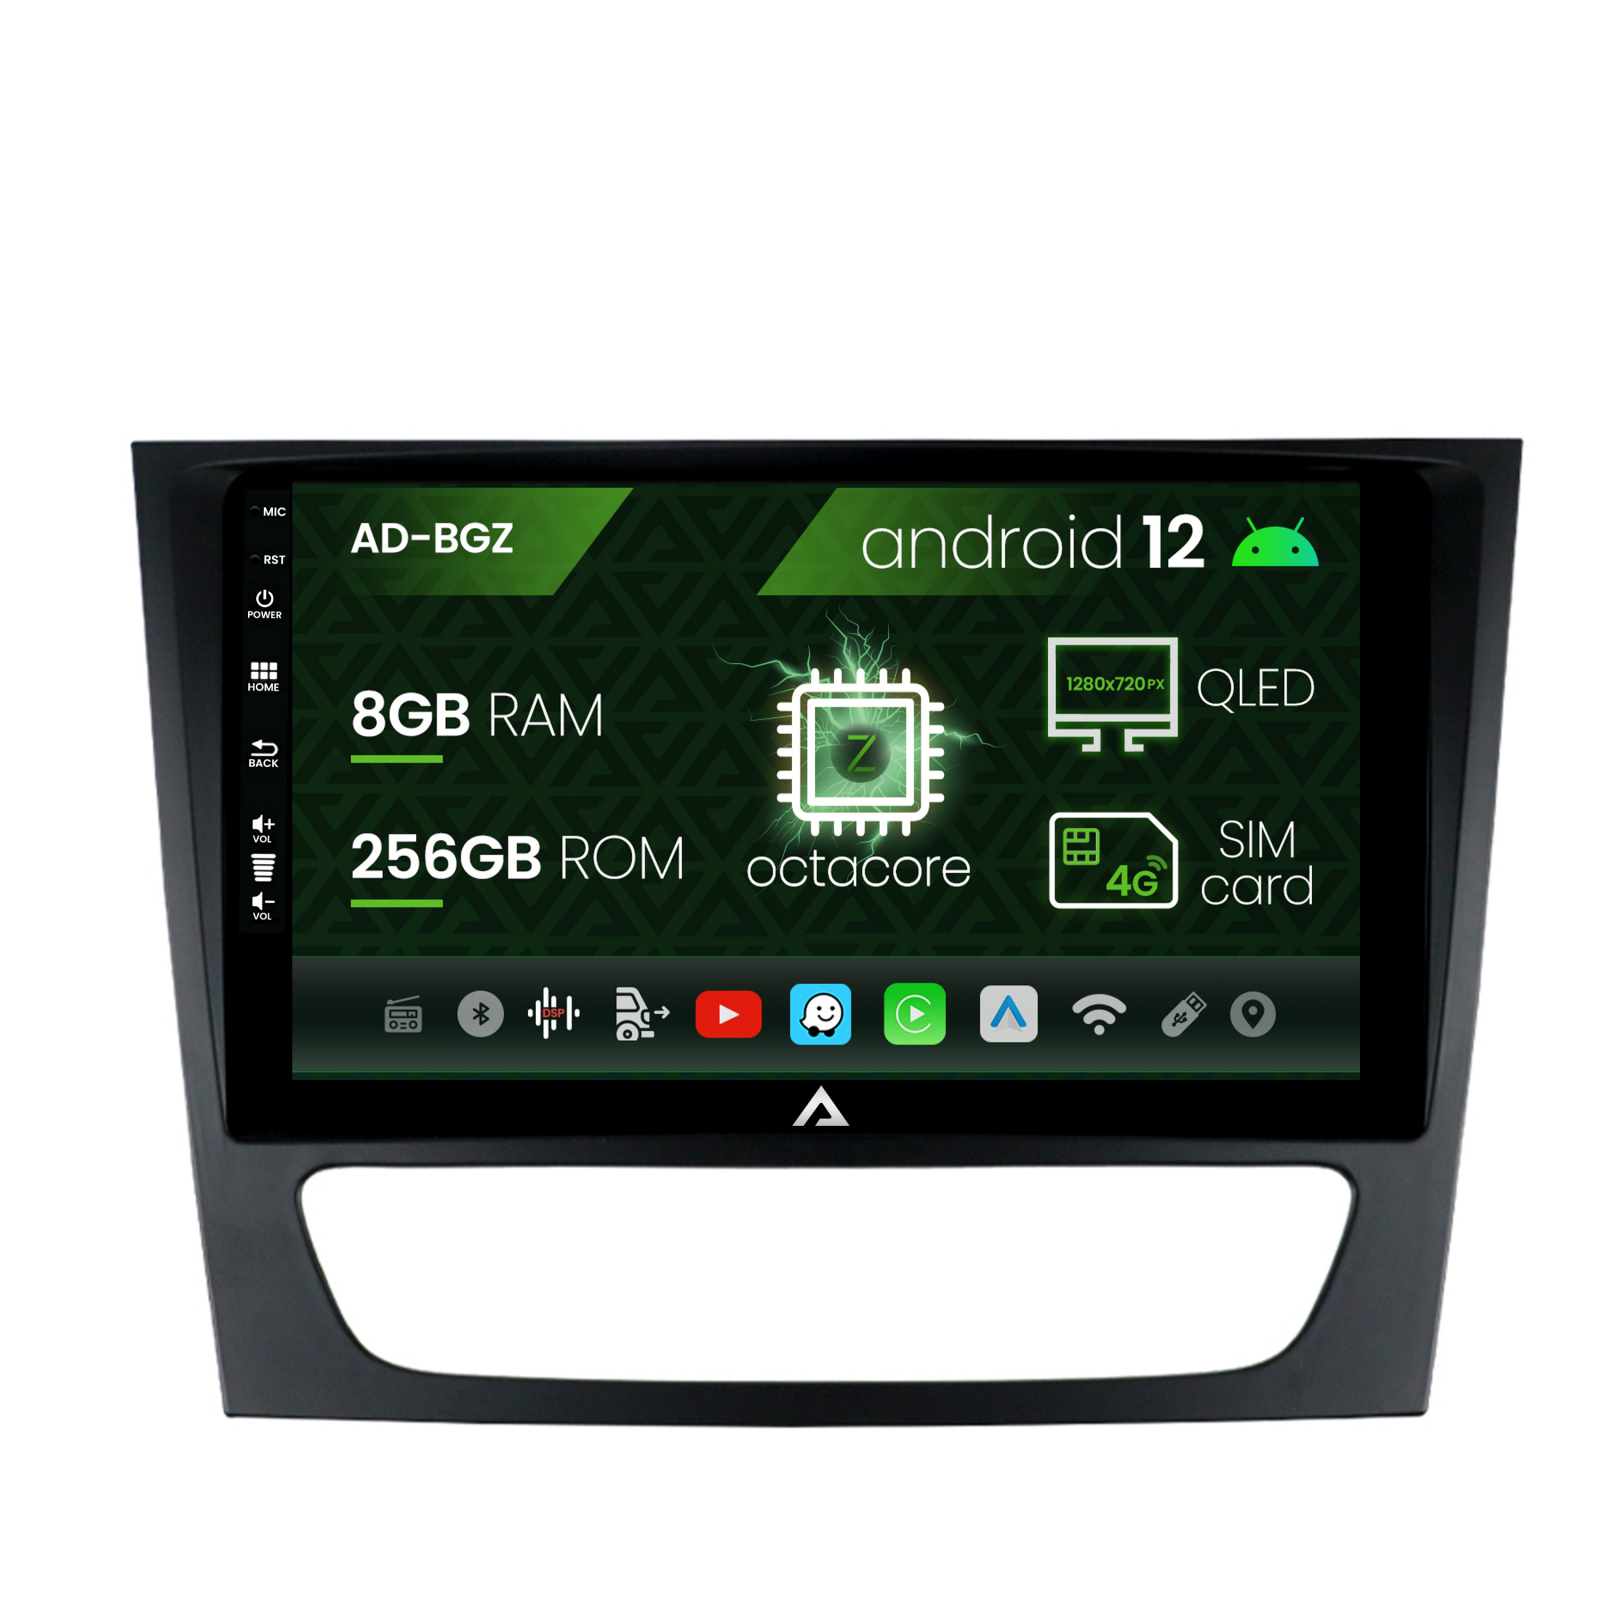 Navigatie Mercedes Benz W211/CLS, Android 12, Z-Octacore / 8GB RAM + 256GB ROM, 9 Inch - AD-BGZ9008+AD-BGRKIT415